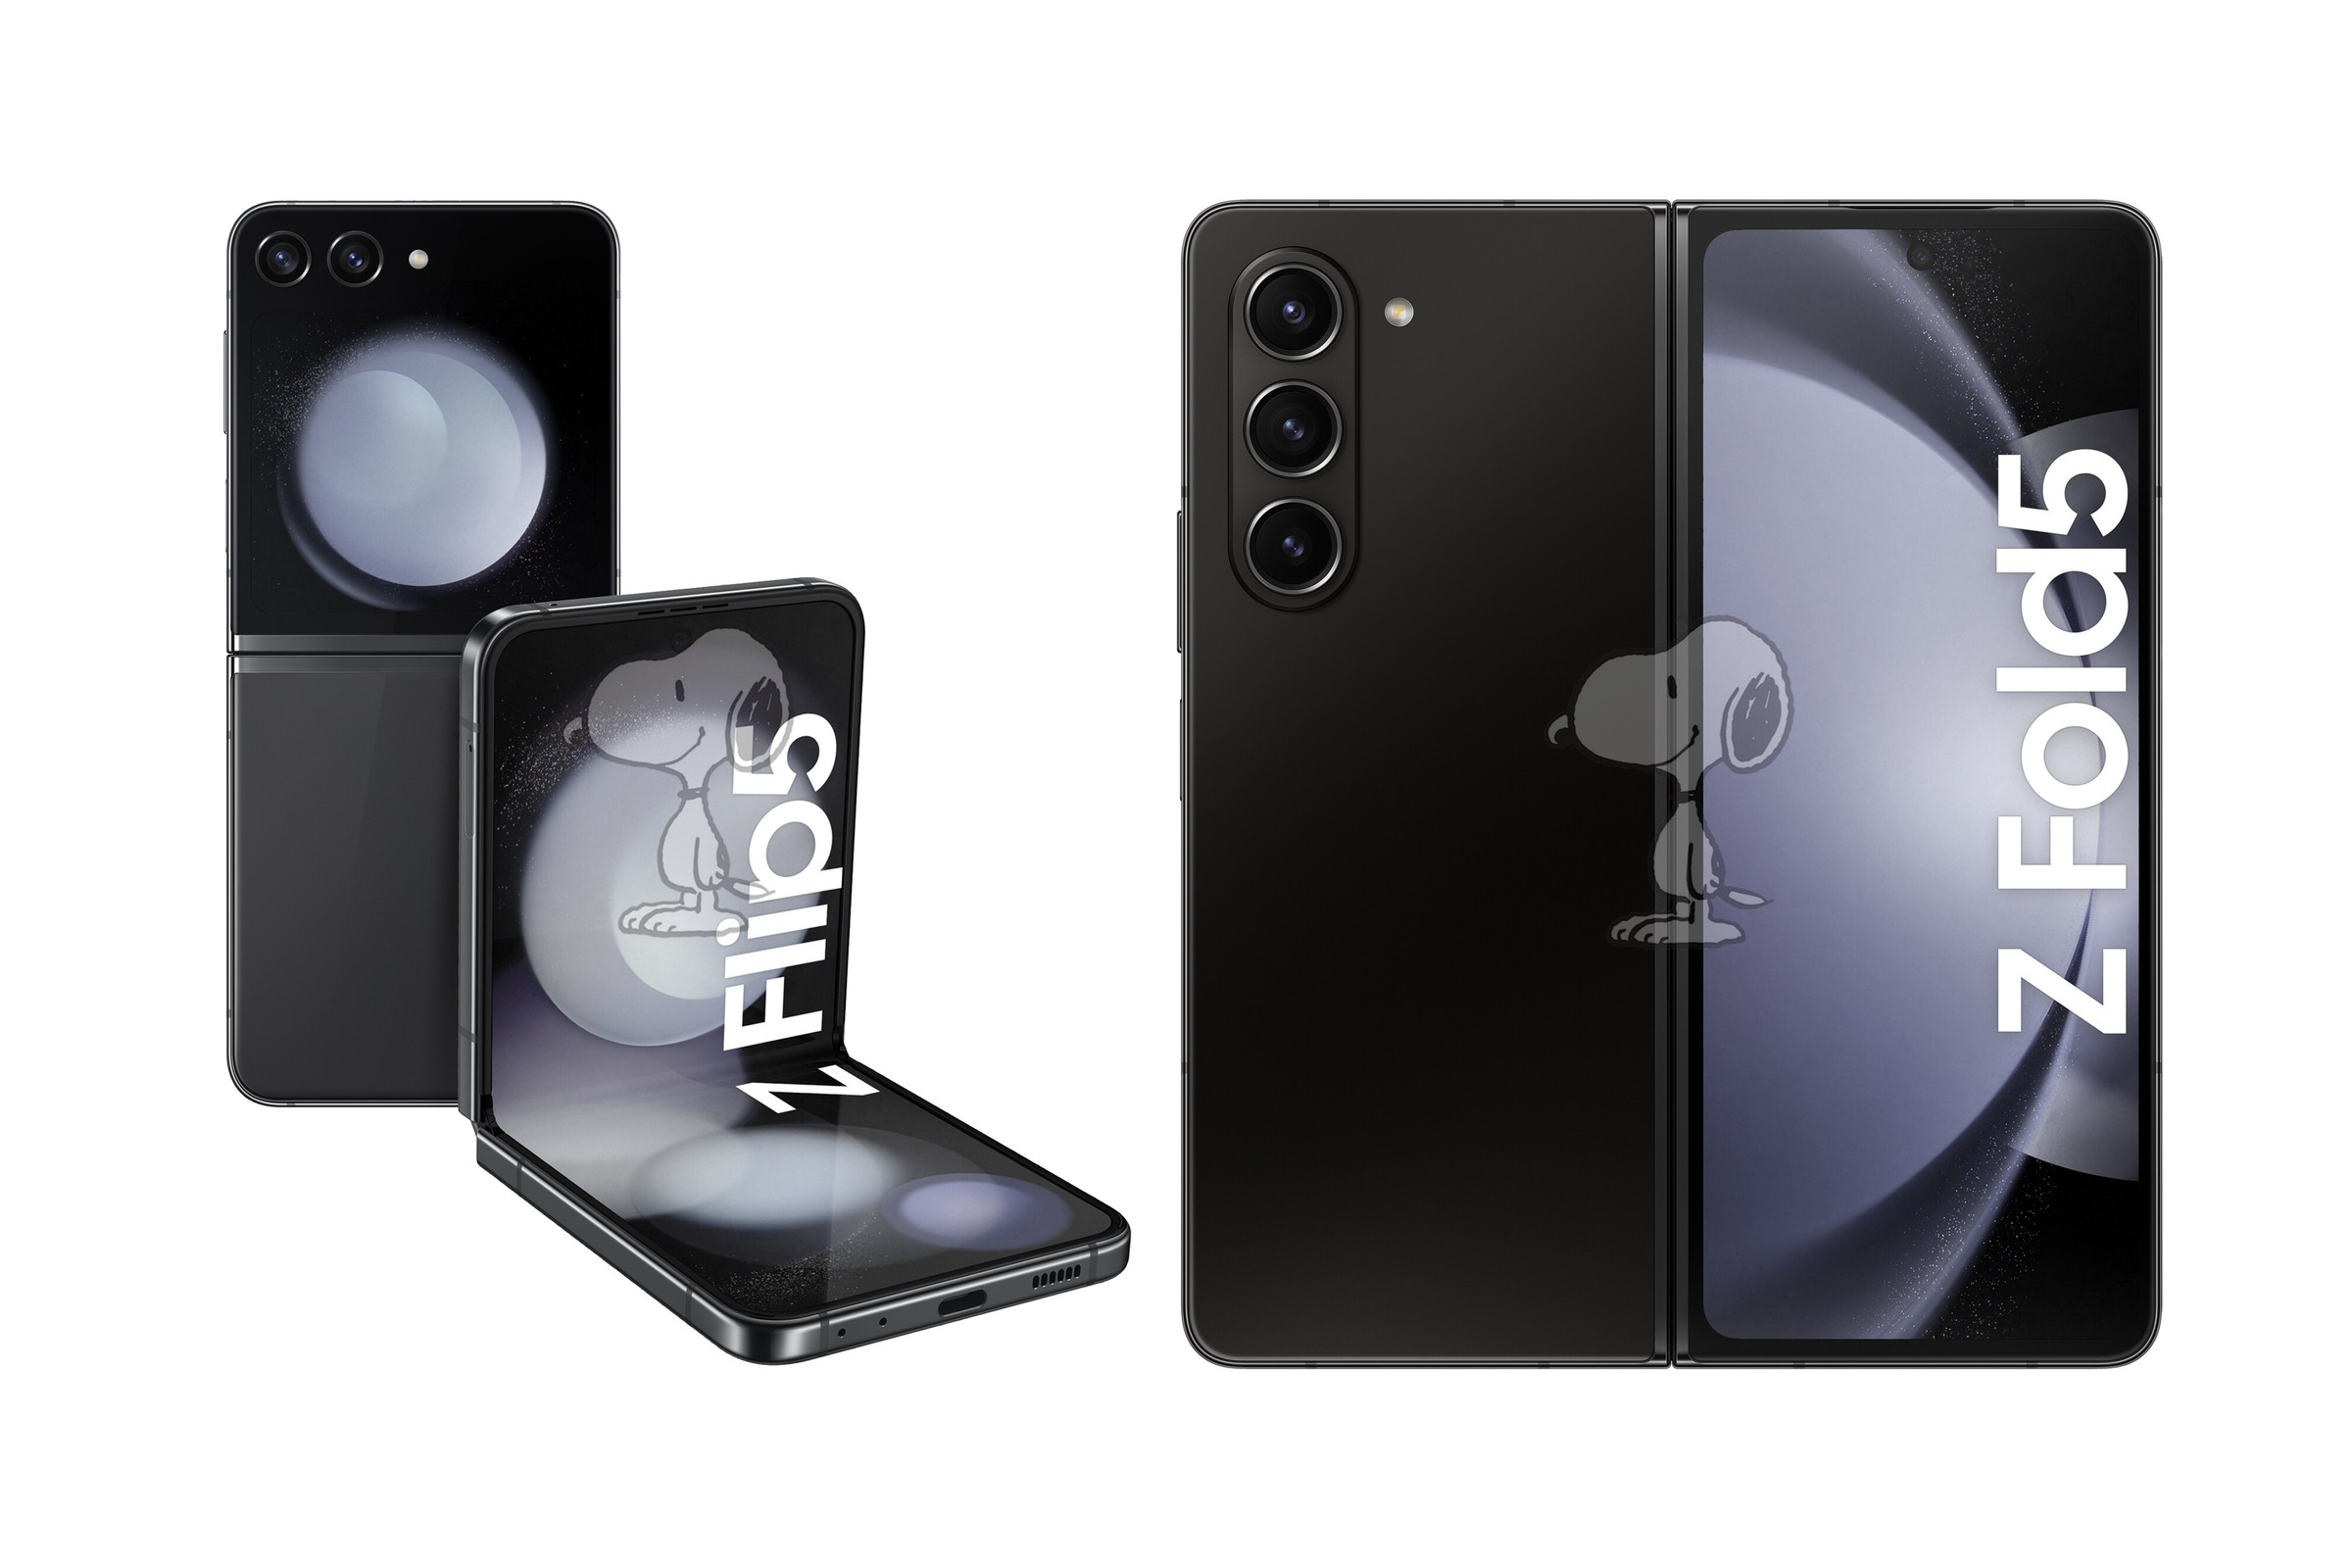 An image showing the Galaxy Z Flip 5, both partially folded and unfolded, alongside an unfolded Galaxy Z Fold 5.